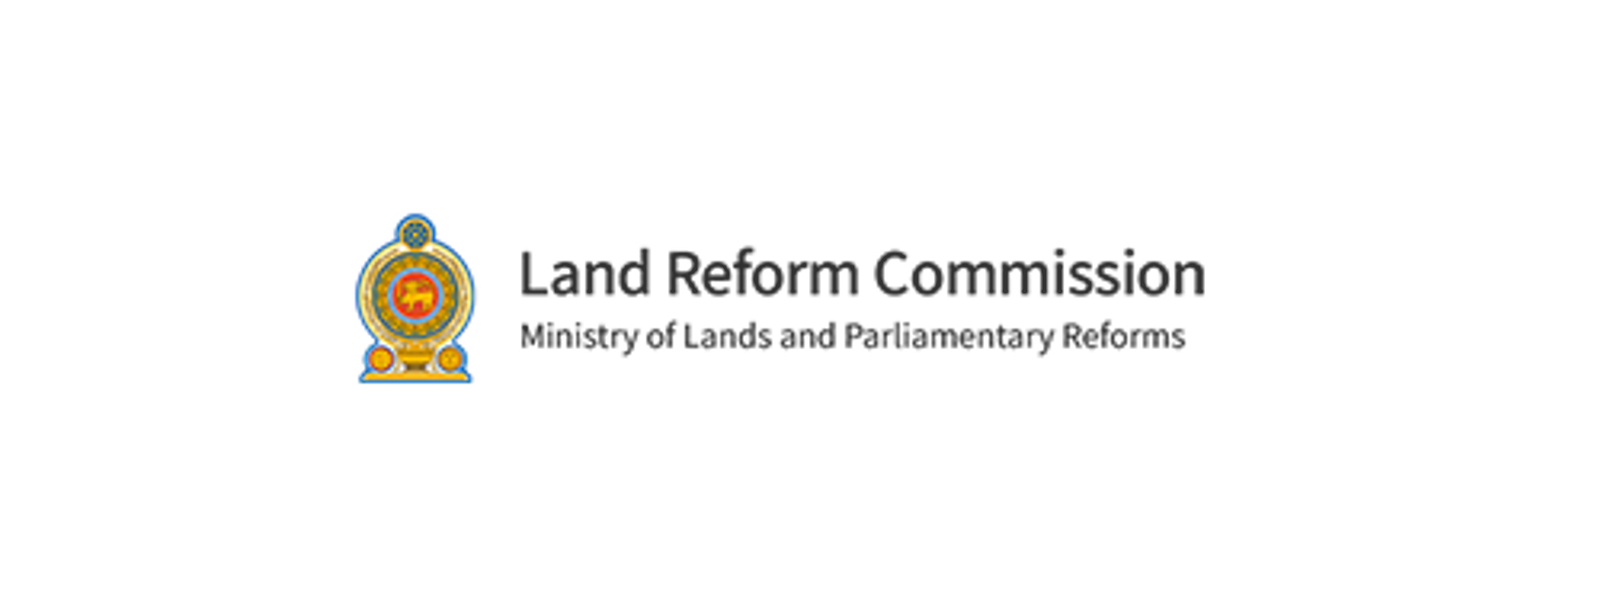 LRC fund for fertilizer project ? : ST report